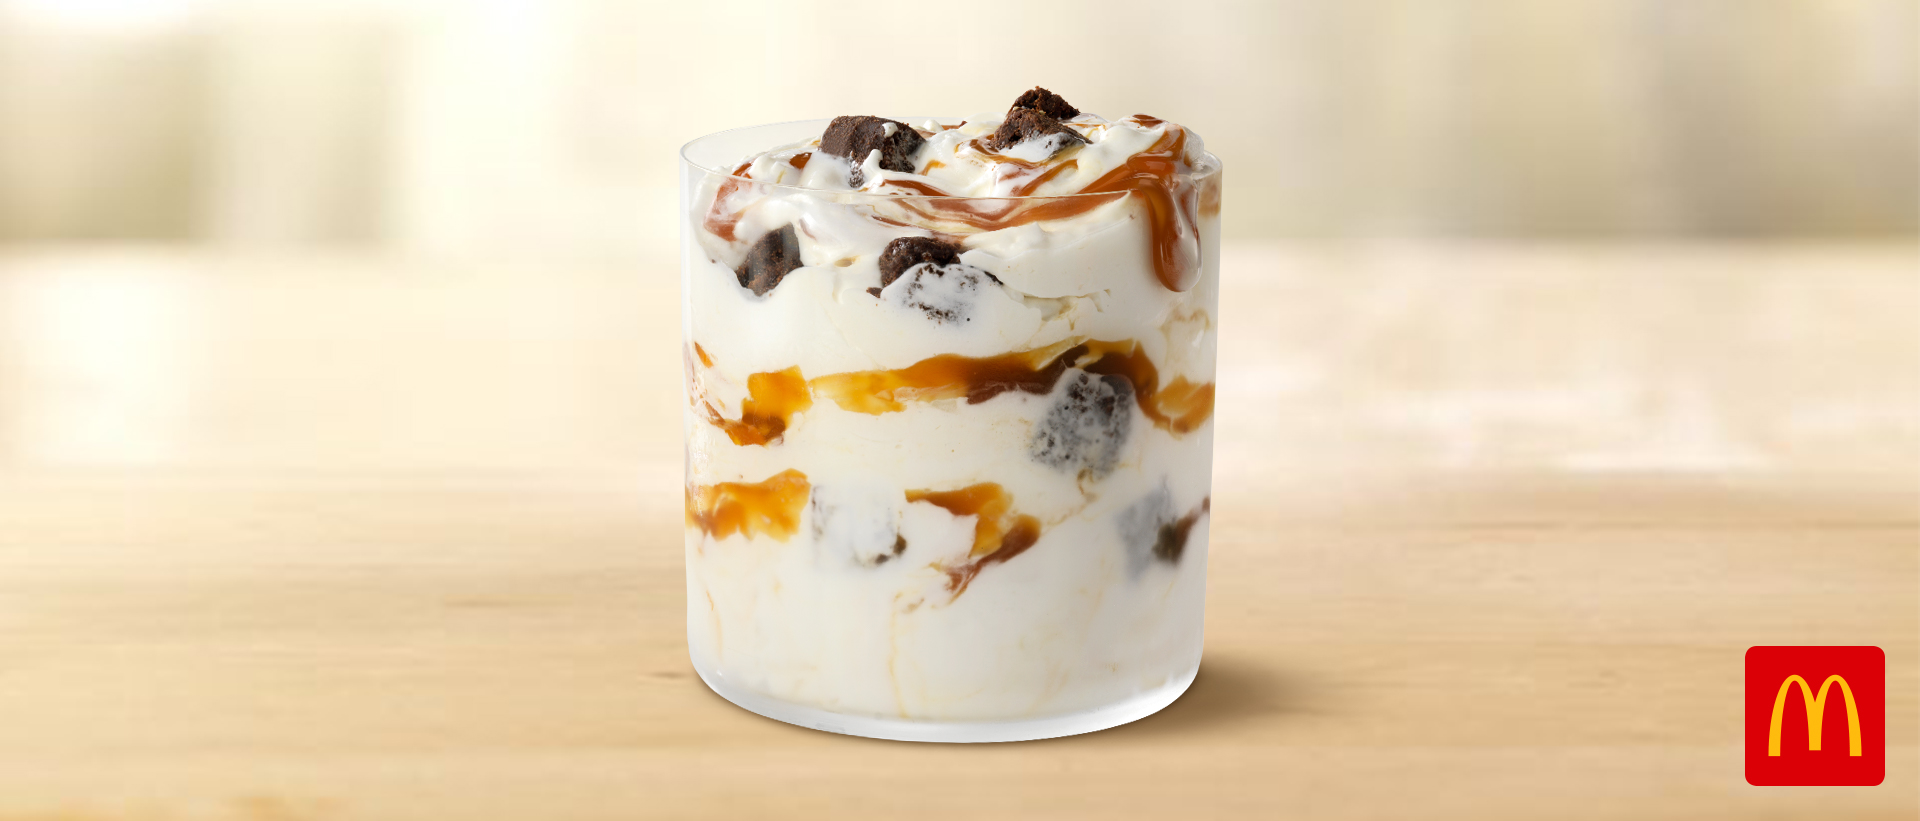 caramel mcflurry dessert from mcdonald's on a table